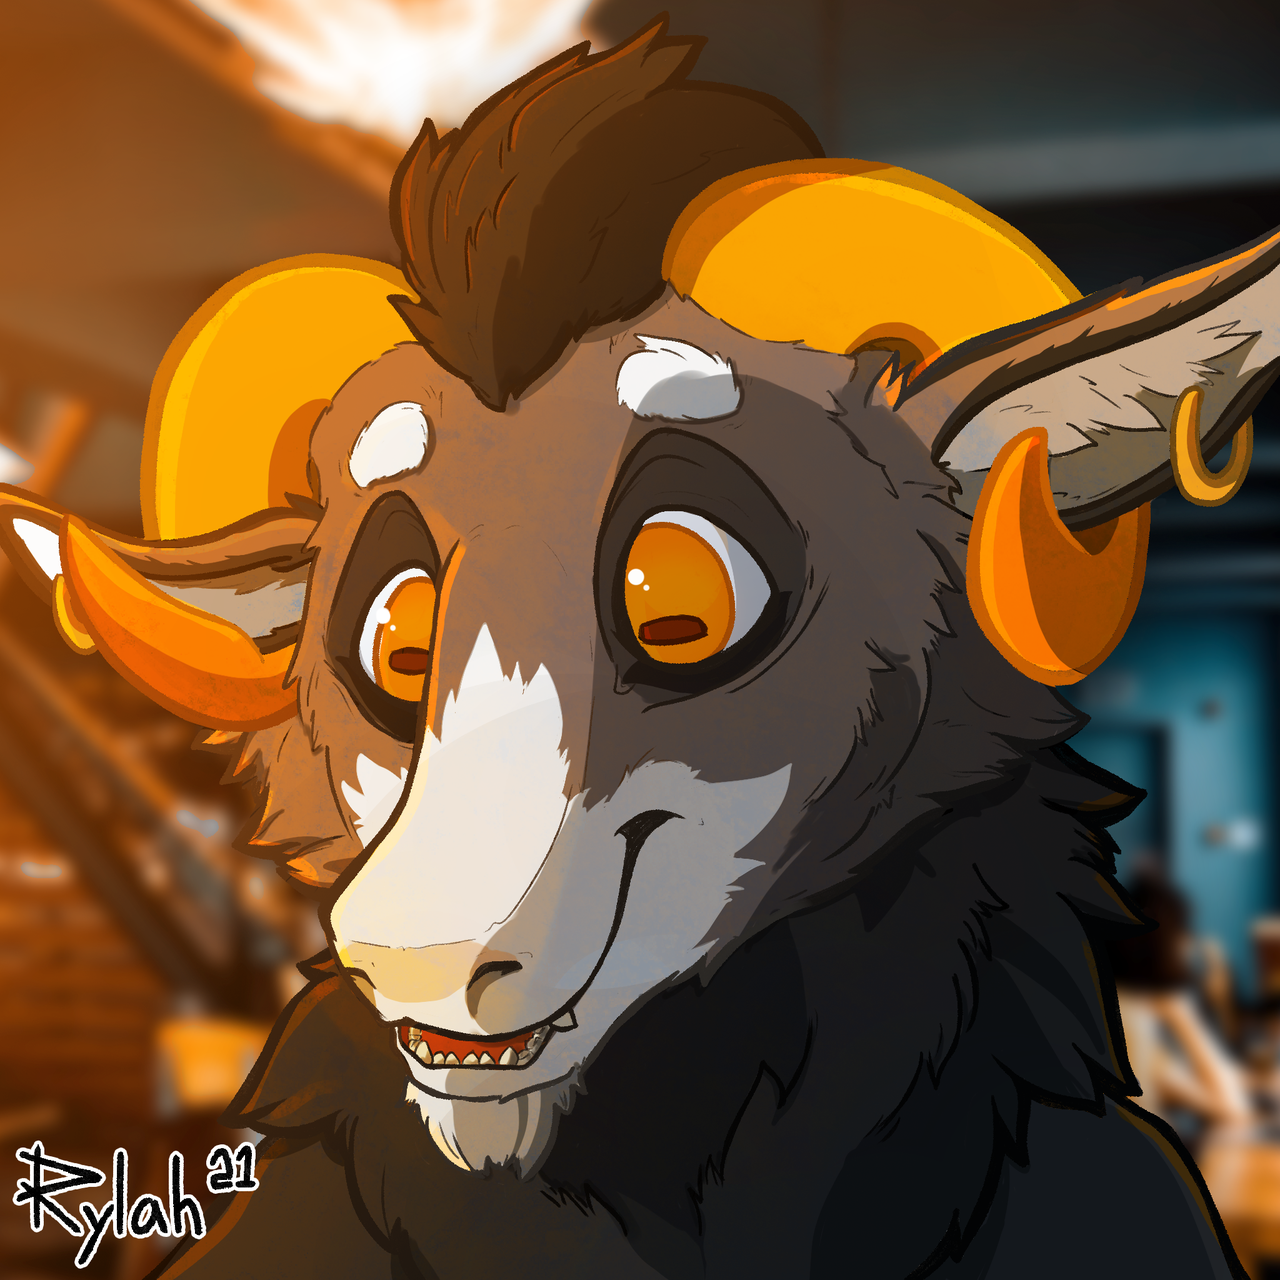 When the waiter brings your burger (by Rylah)